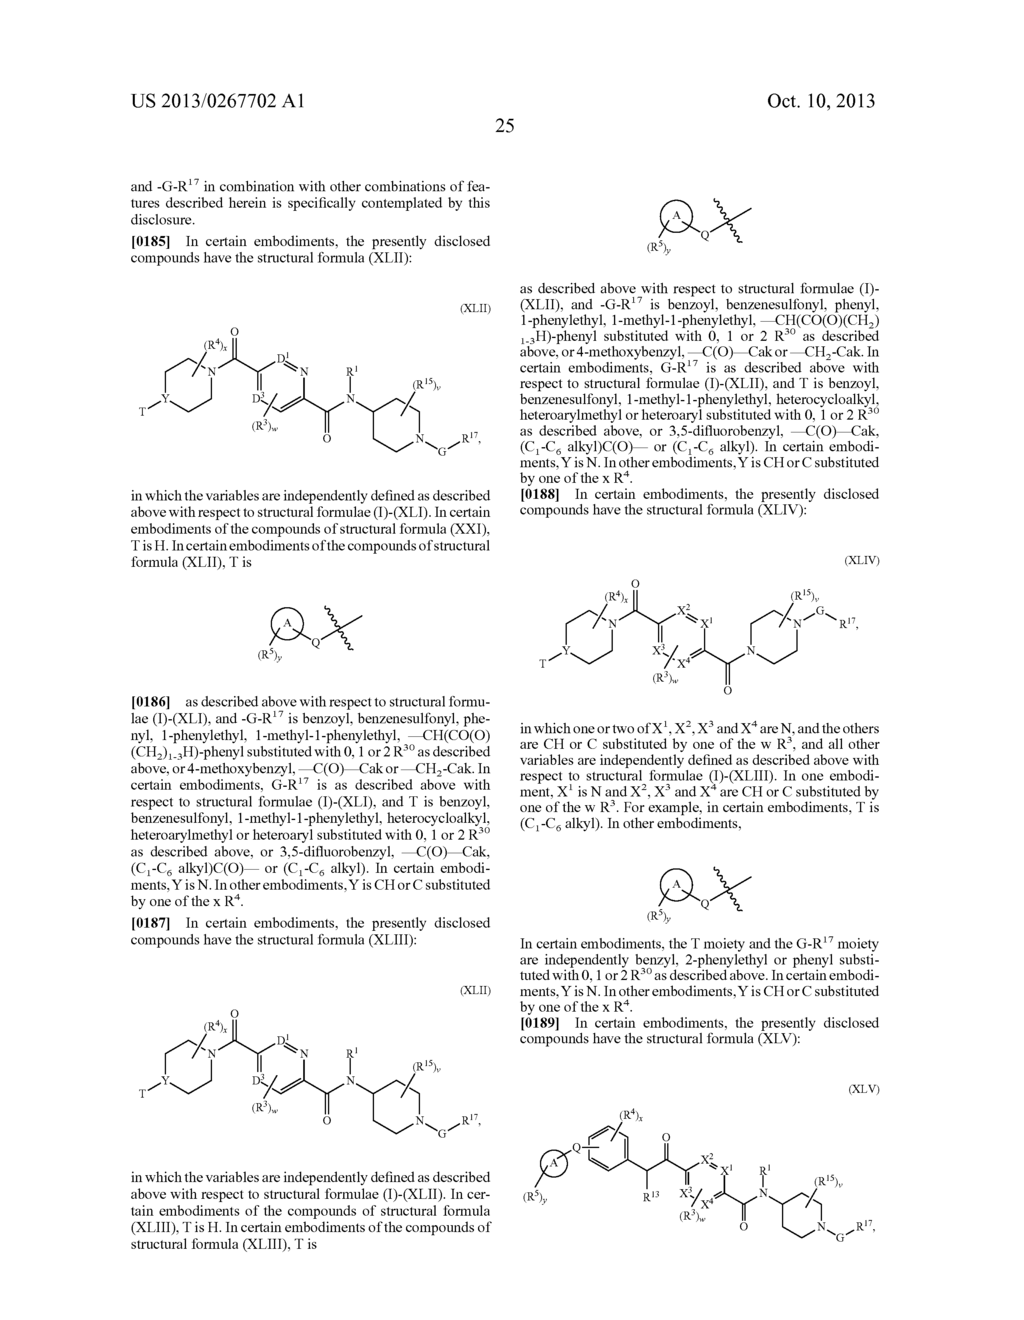 AMPK-ACTIVATING HETEROCYCLIC COMPOUNDS AND METHODS FOR USING THE SAME - diagram, schematic, and image 26